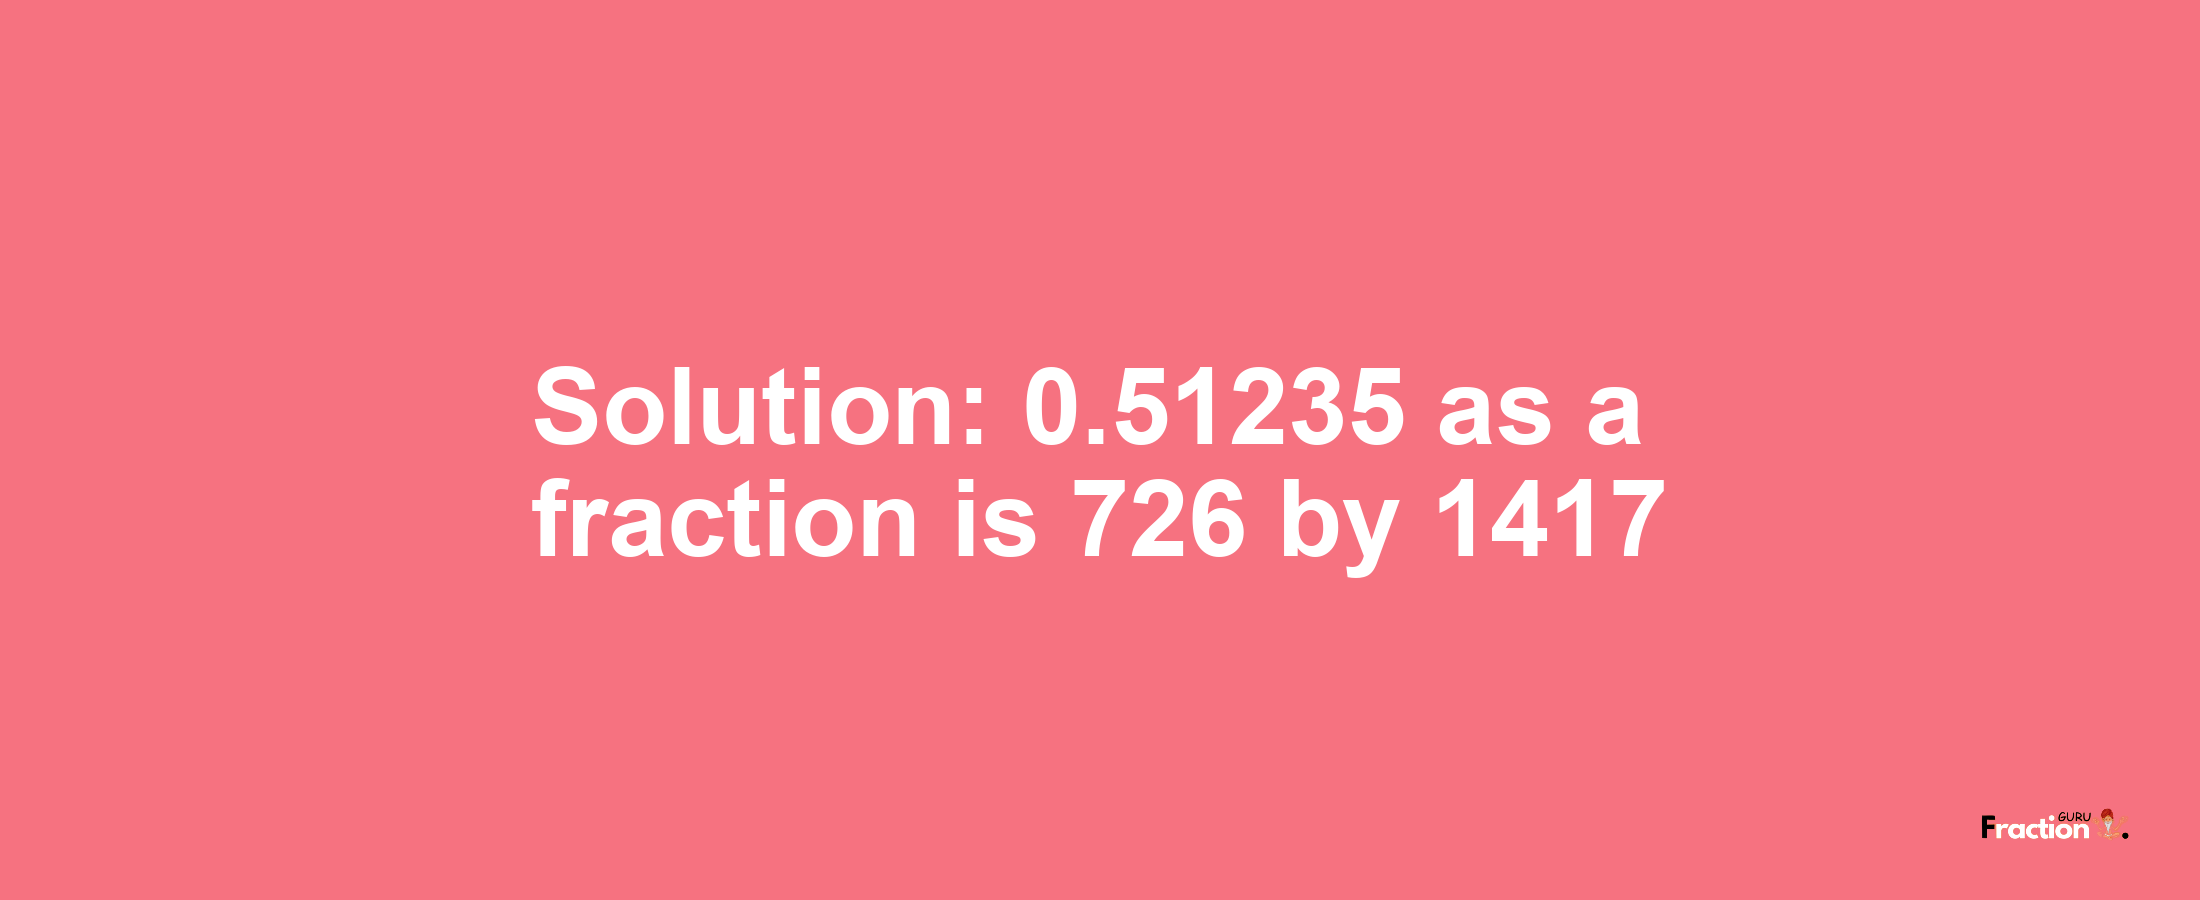 Solution:0.51235 as a fraction is 726/1417